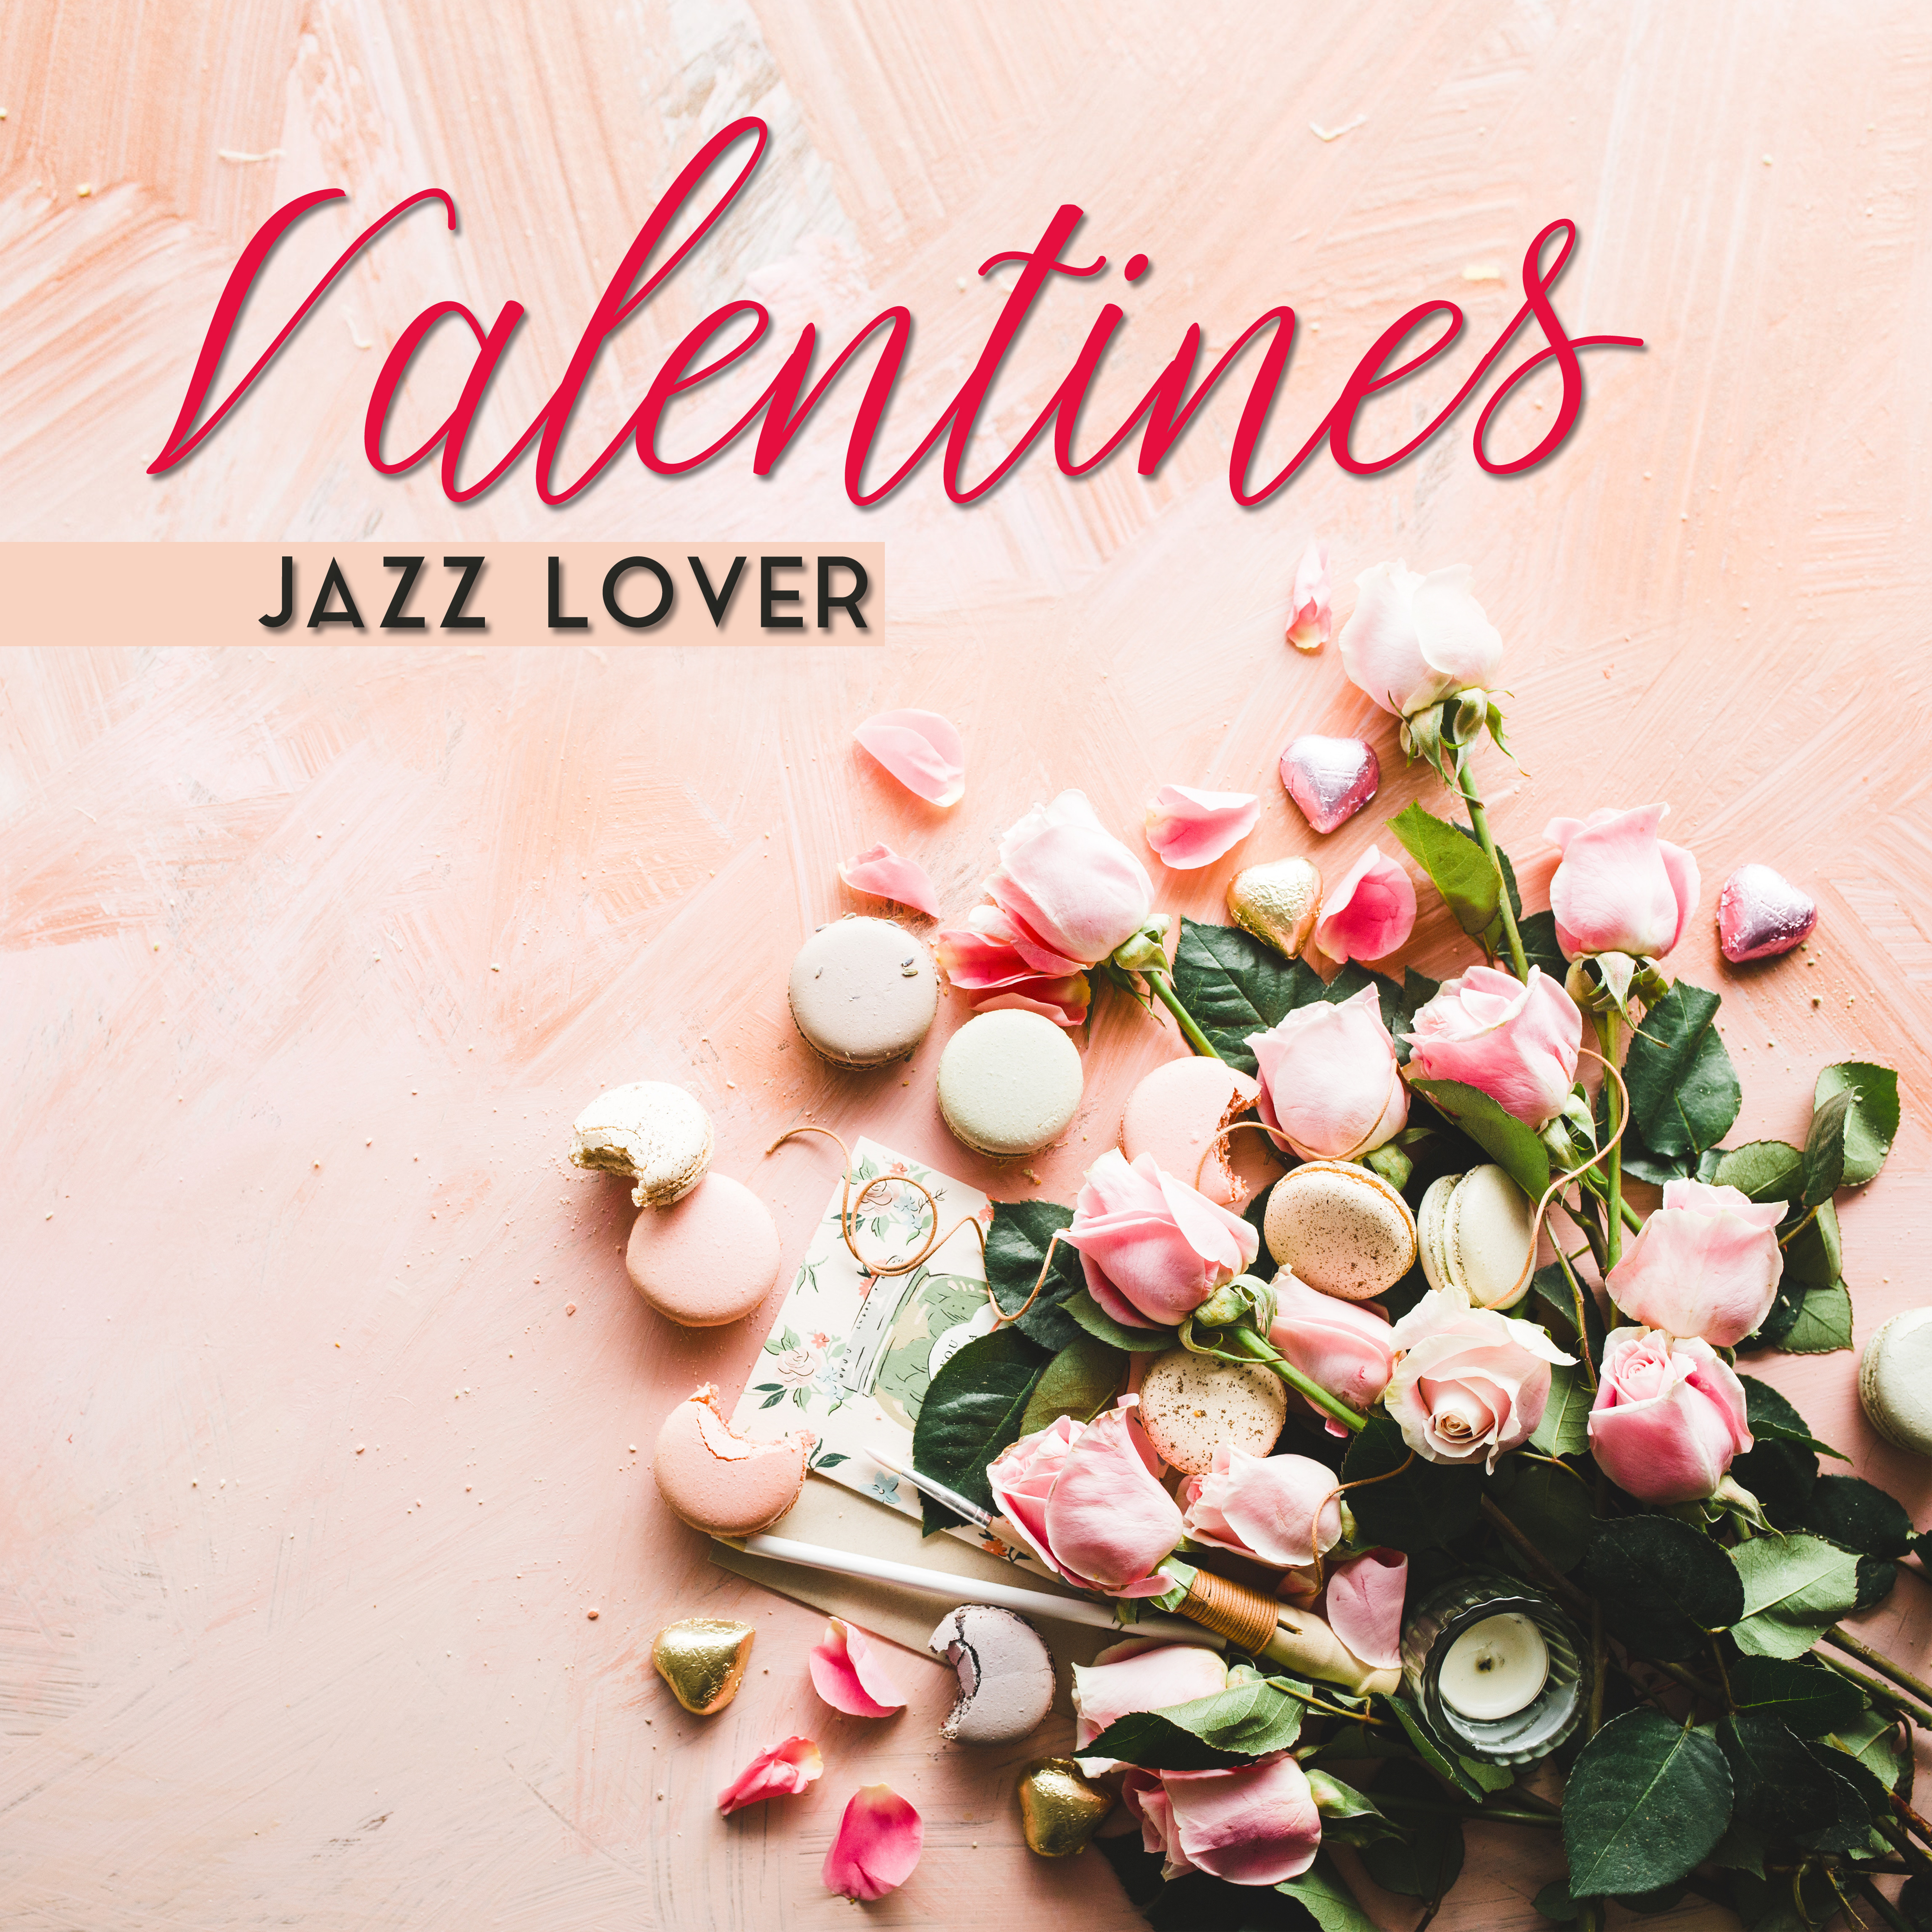 Valentines Jazz Lover - Instrumental Jazz Music Ambient, Love Songs, *** Music for Lovers, Sensual Jazz at Night, Music for Erotic Massage